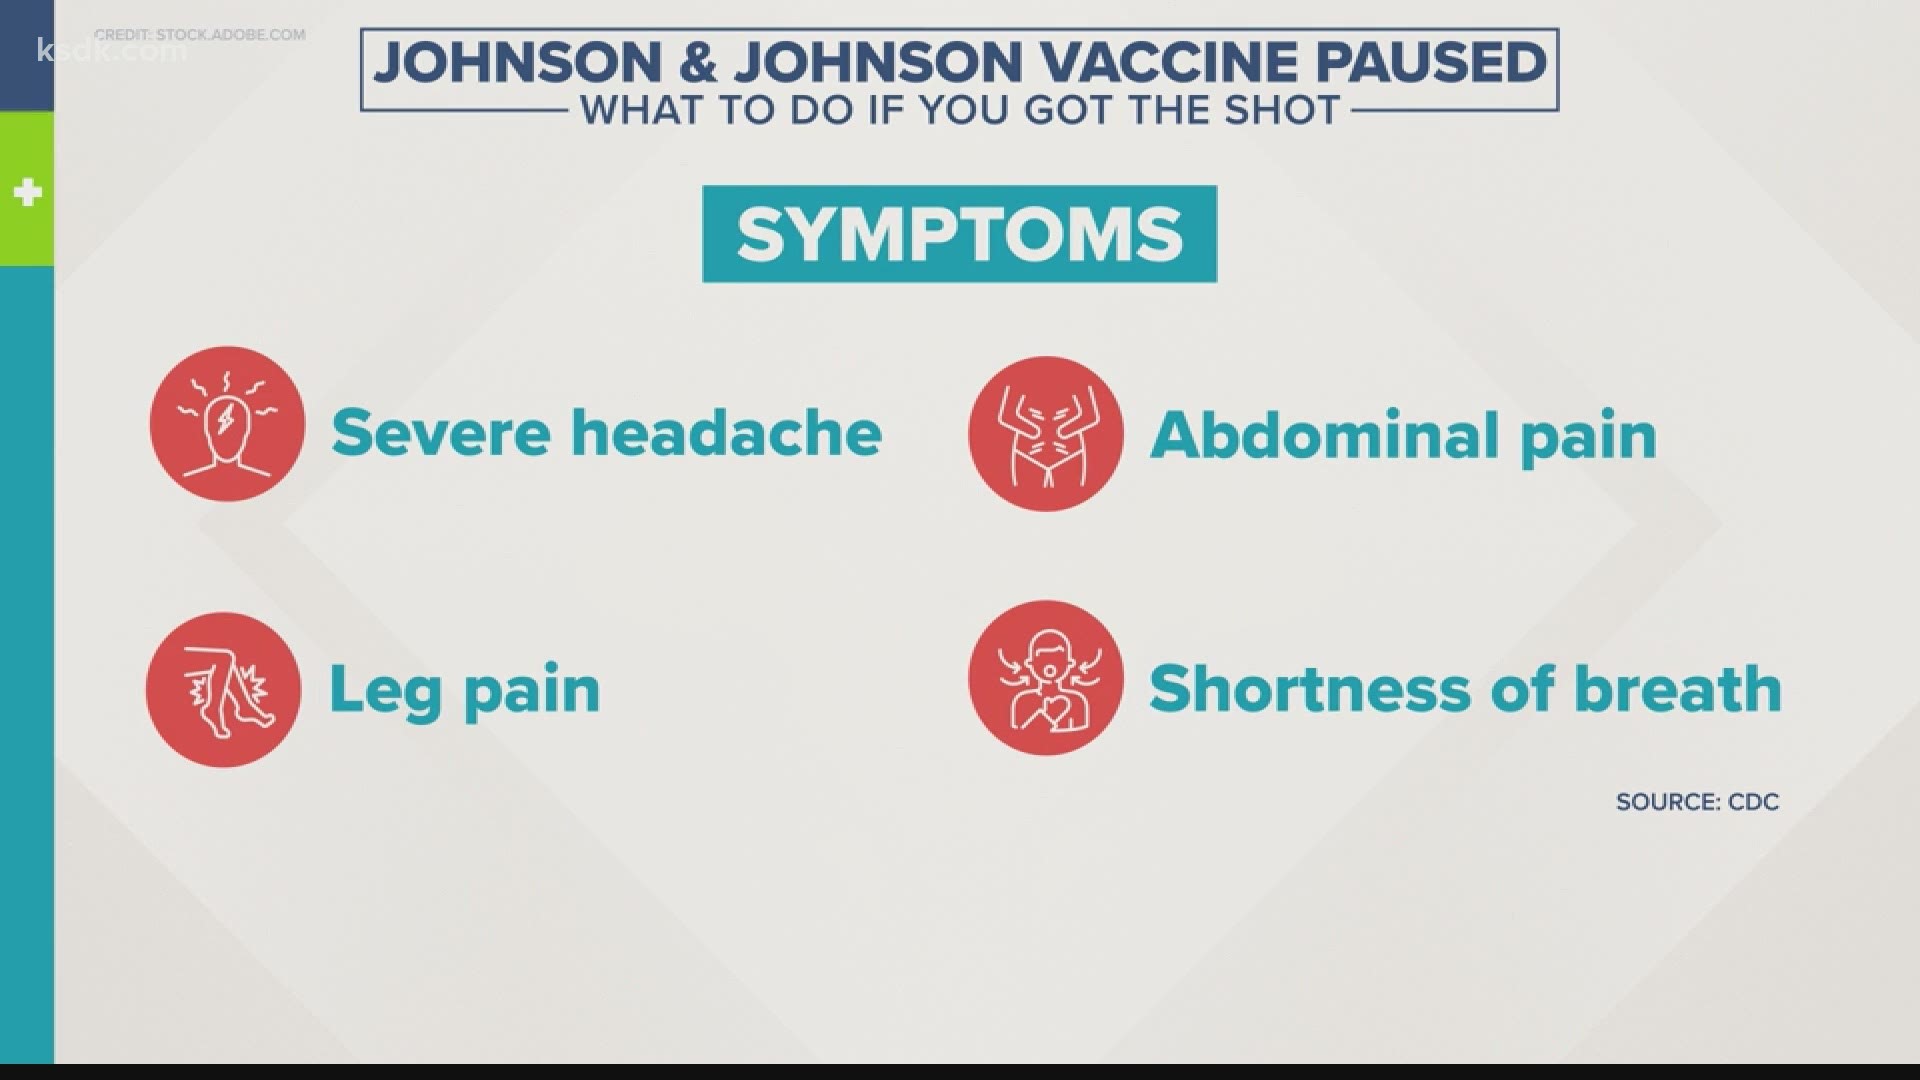 Call your doctor if you're experiencing symptoms consistent with a vaccine reaction